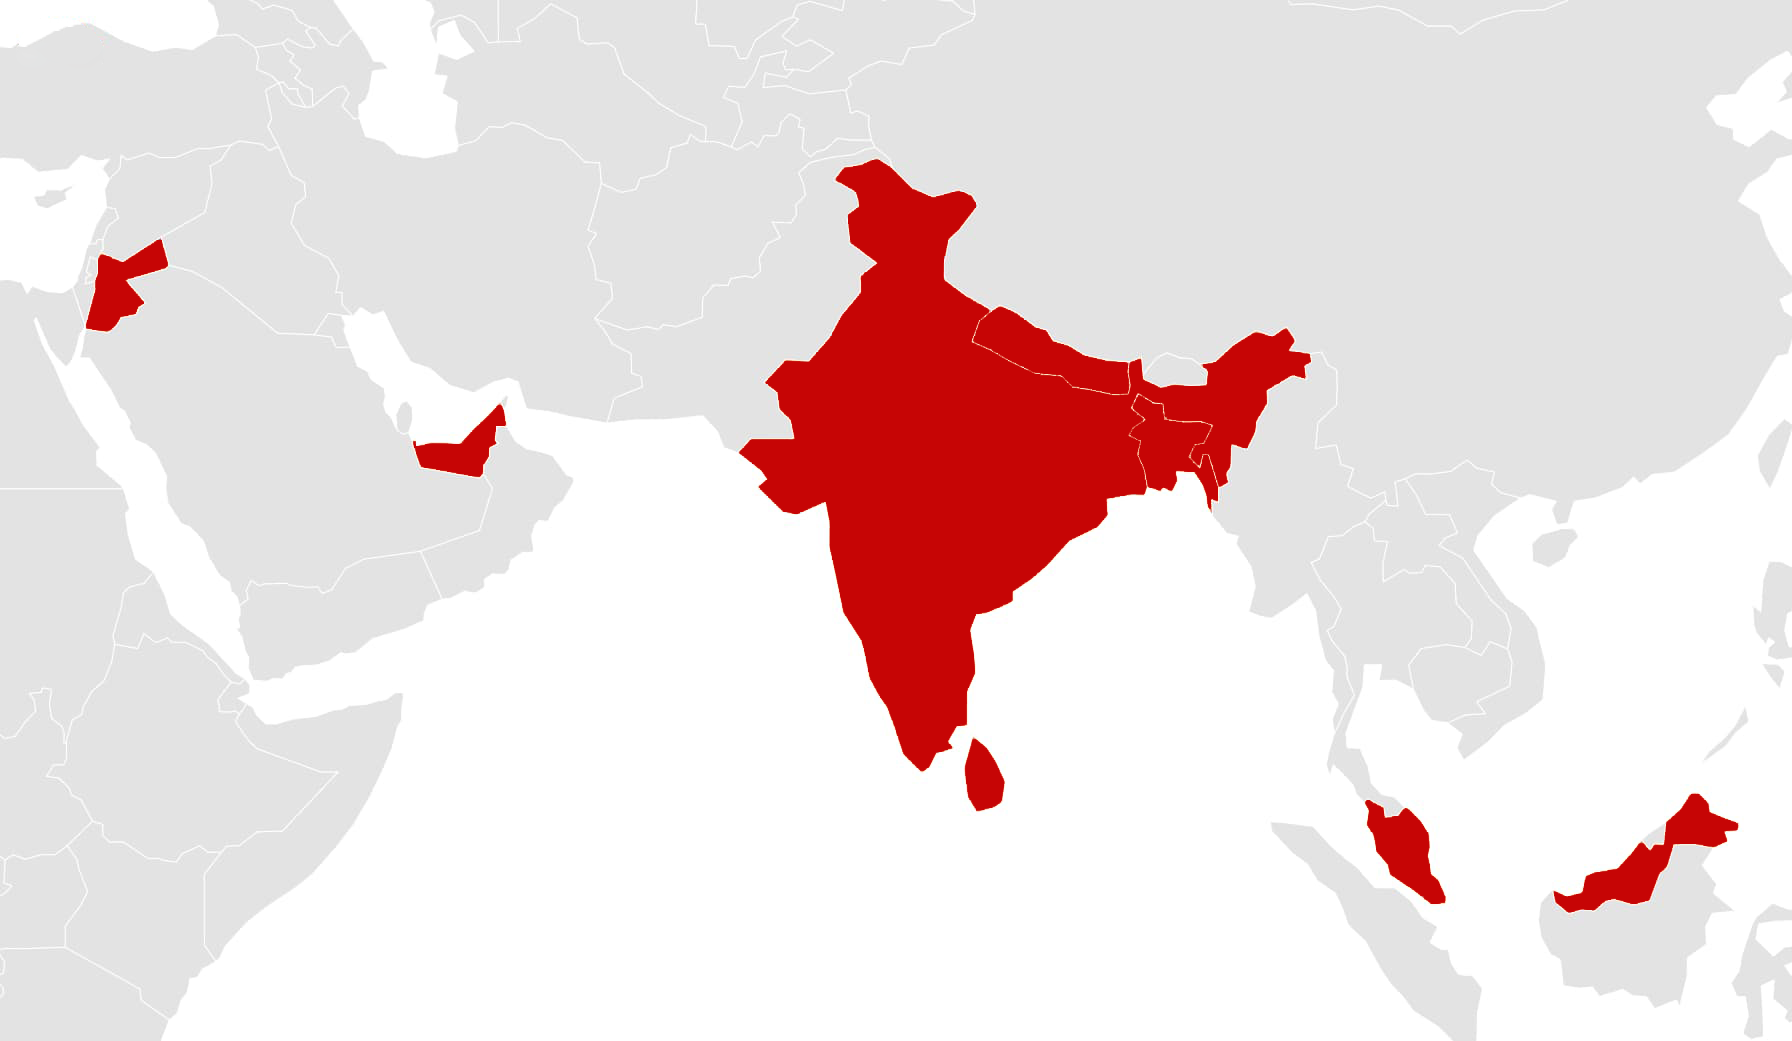 India and the countries where dudigitalglobal provide services